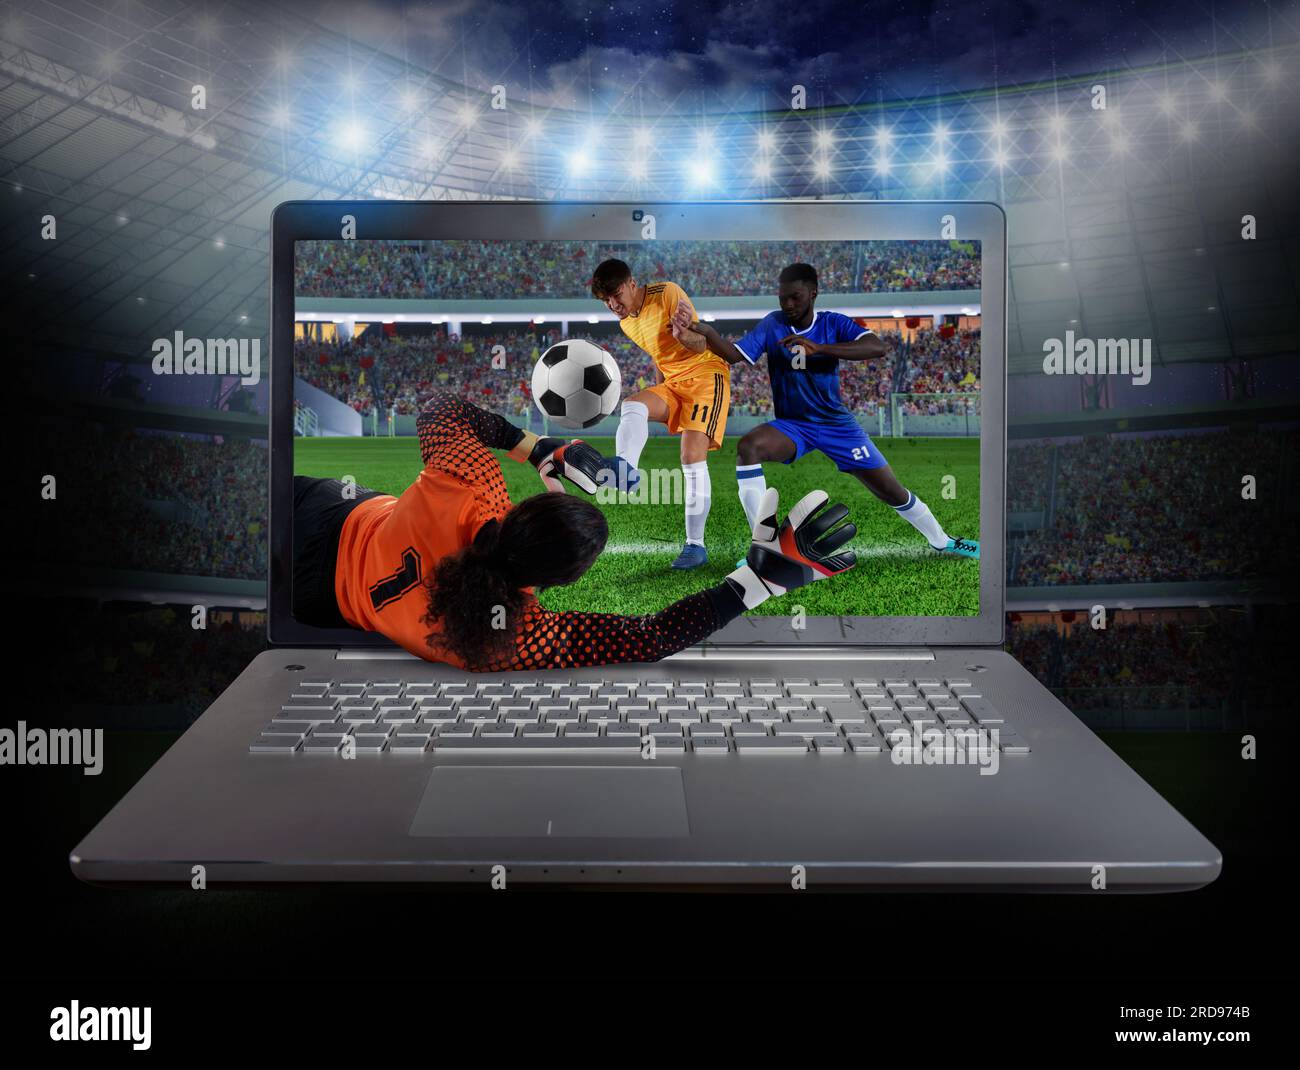 Live streaming of a soccer player match on a laptop Stock Photo